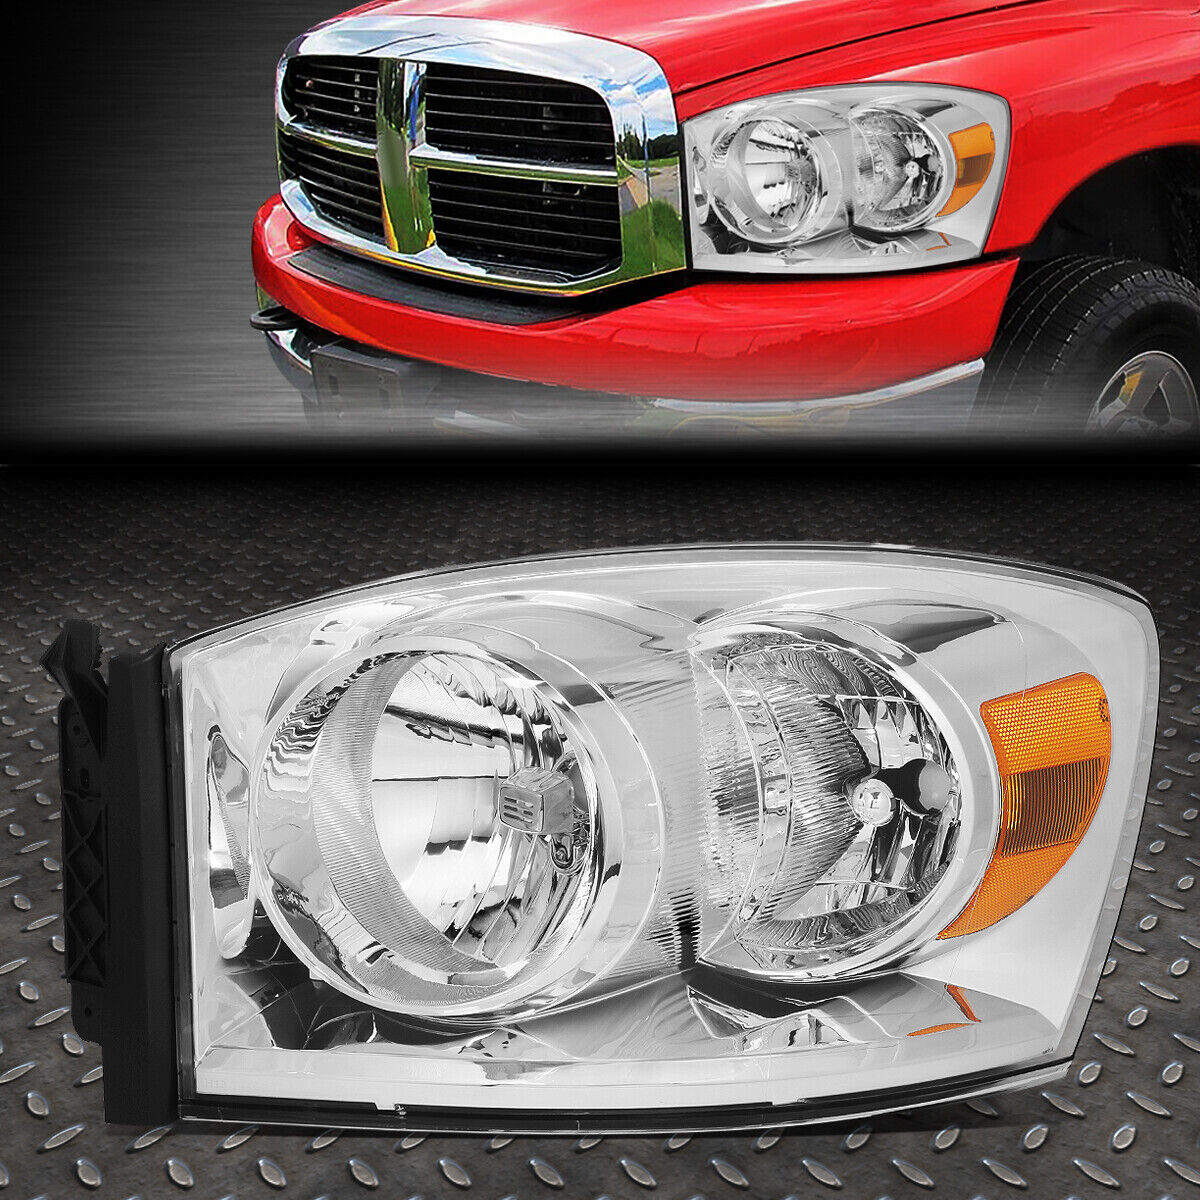 FOR 07-10 DODGE RAM TRUCK LEFT DRIVER SIDE OE STYLE FRONT HEADLIGHT 68003125AB